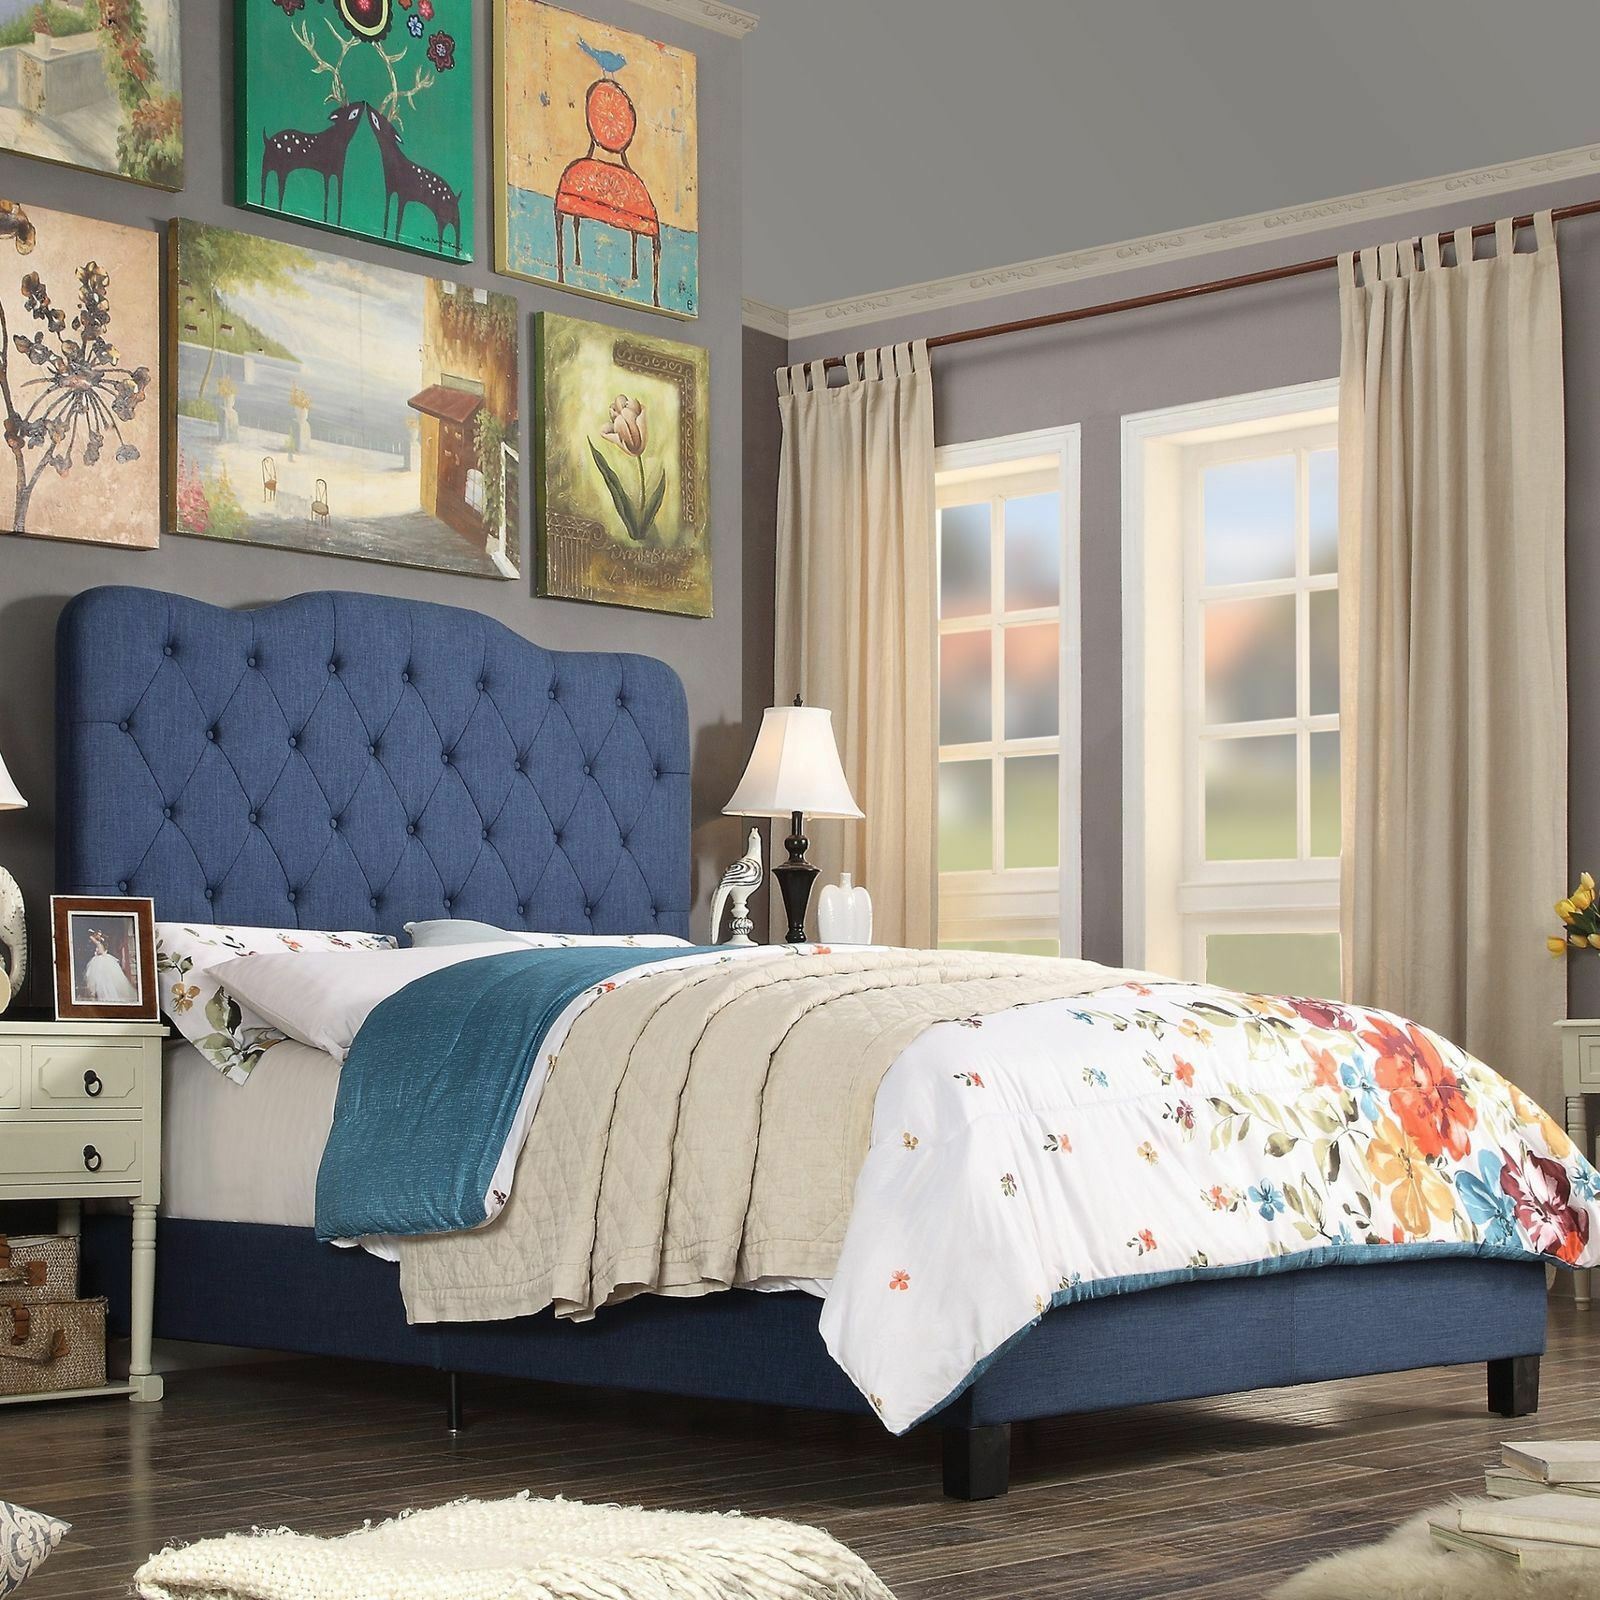 Twin Full Queen King Blue Upholstered Platform Bed Frame Tufted Fabric